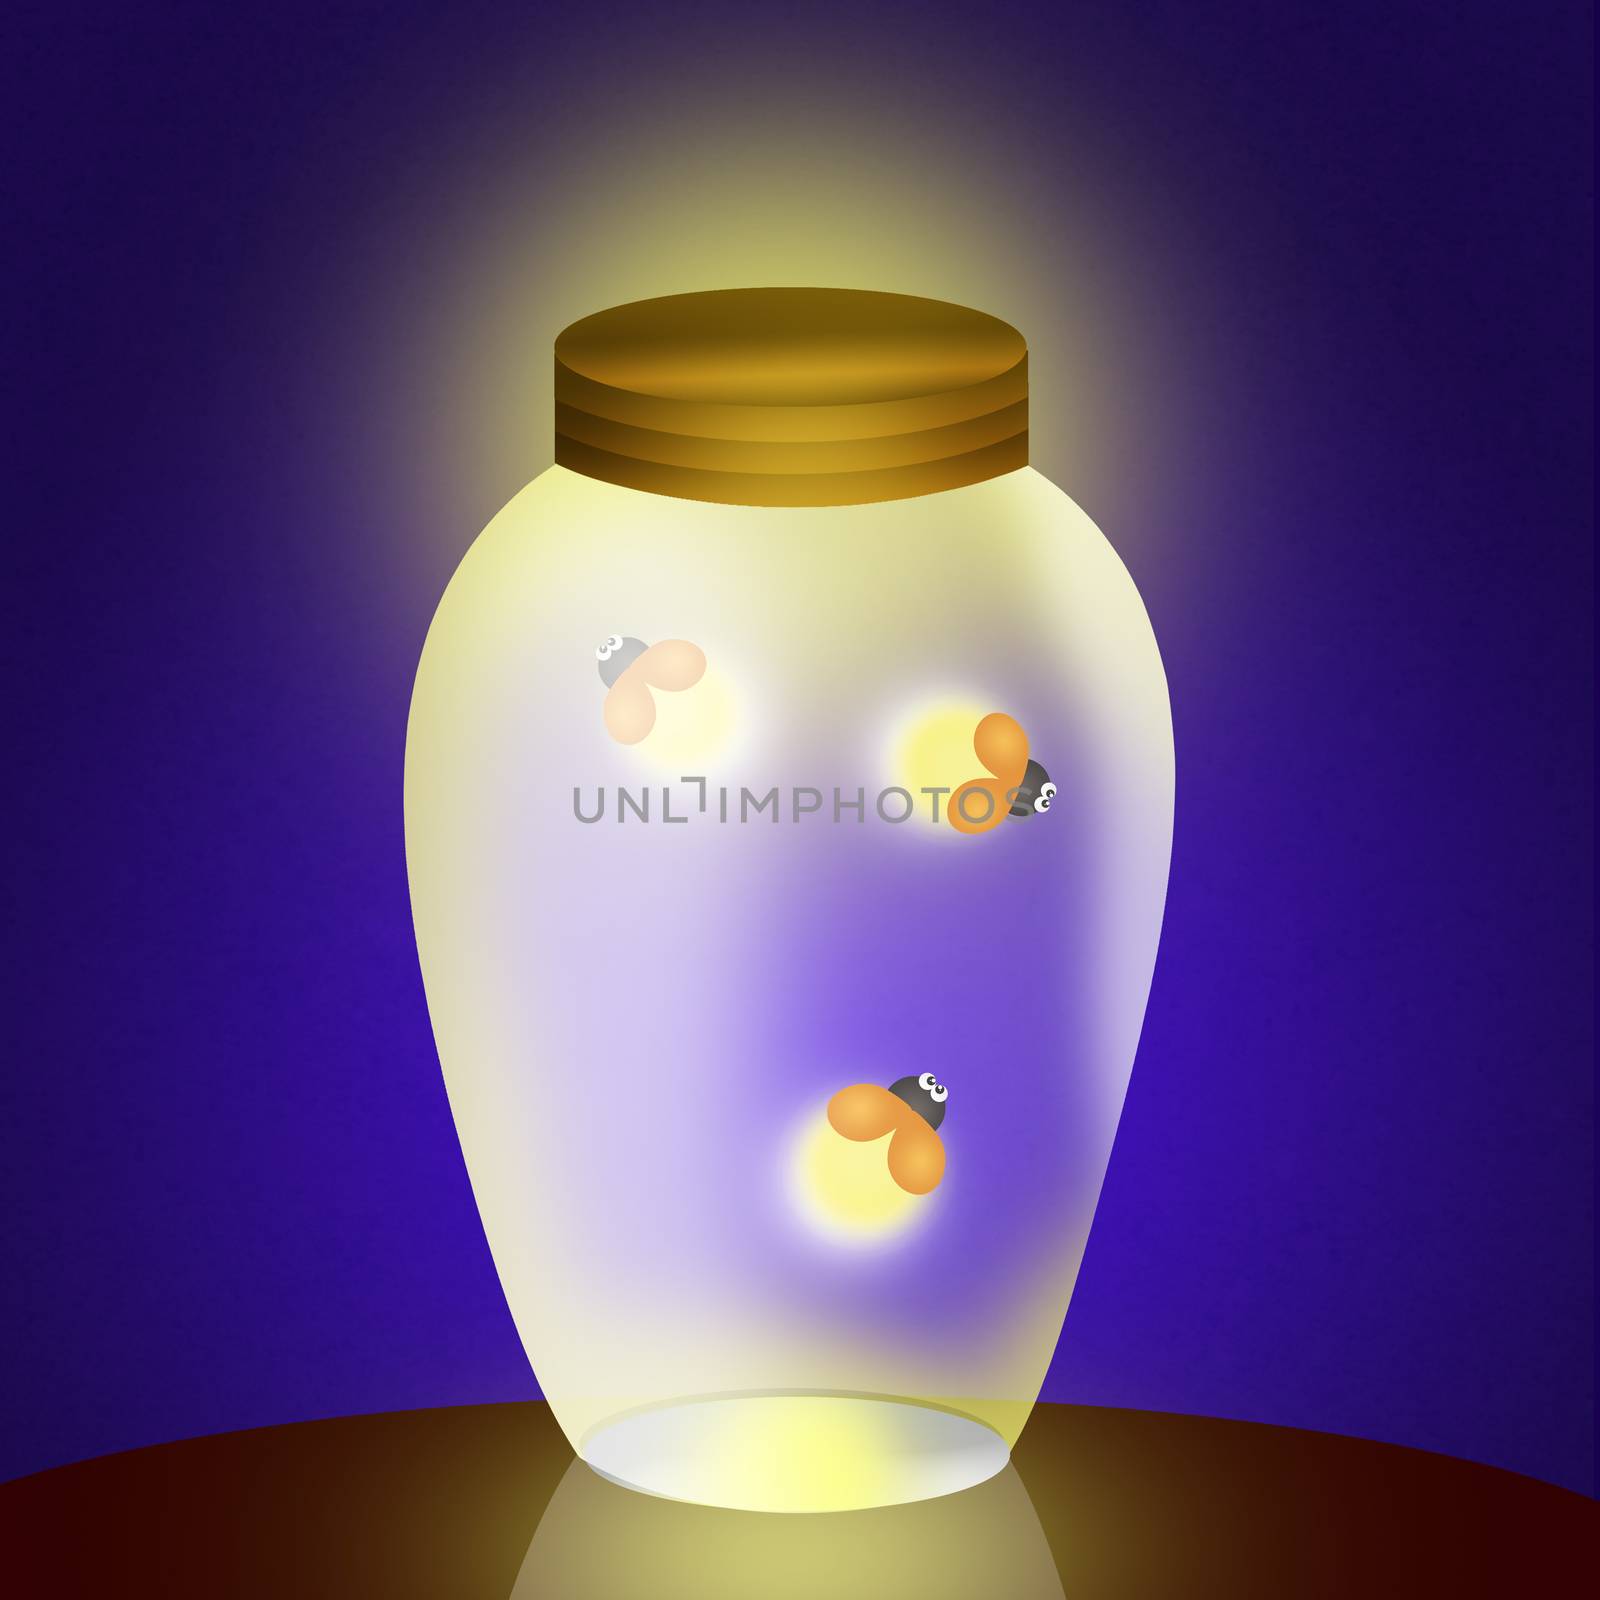 fireflies in the jar by adrenalina